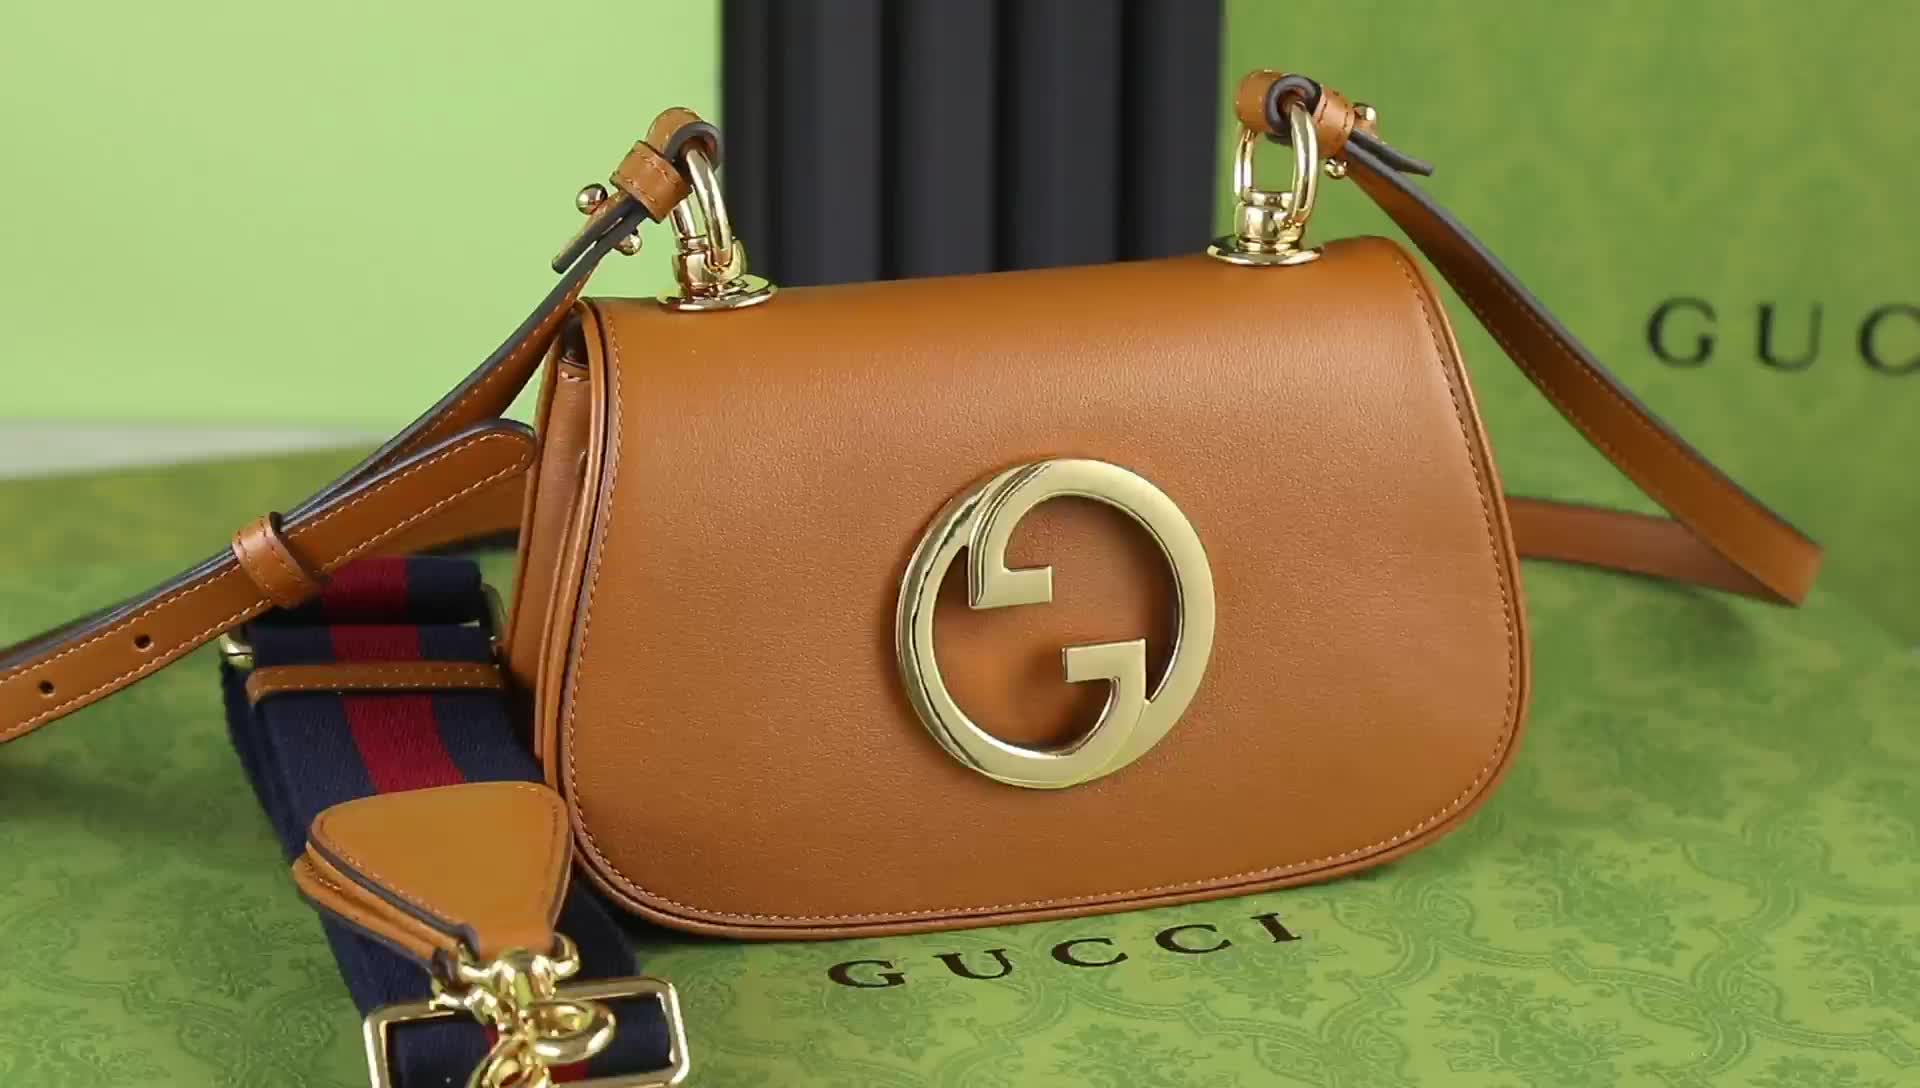 Gucci Bag Promotion Code: EY85